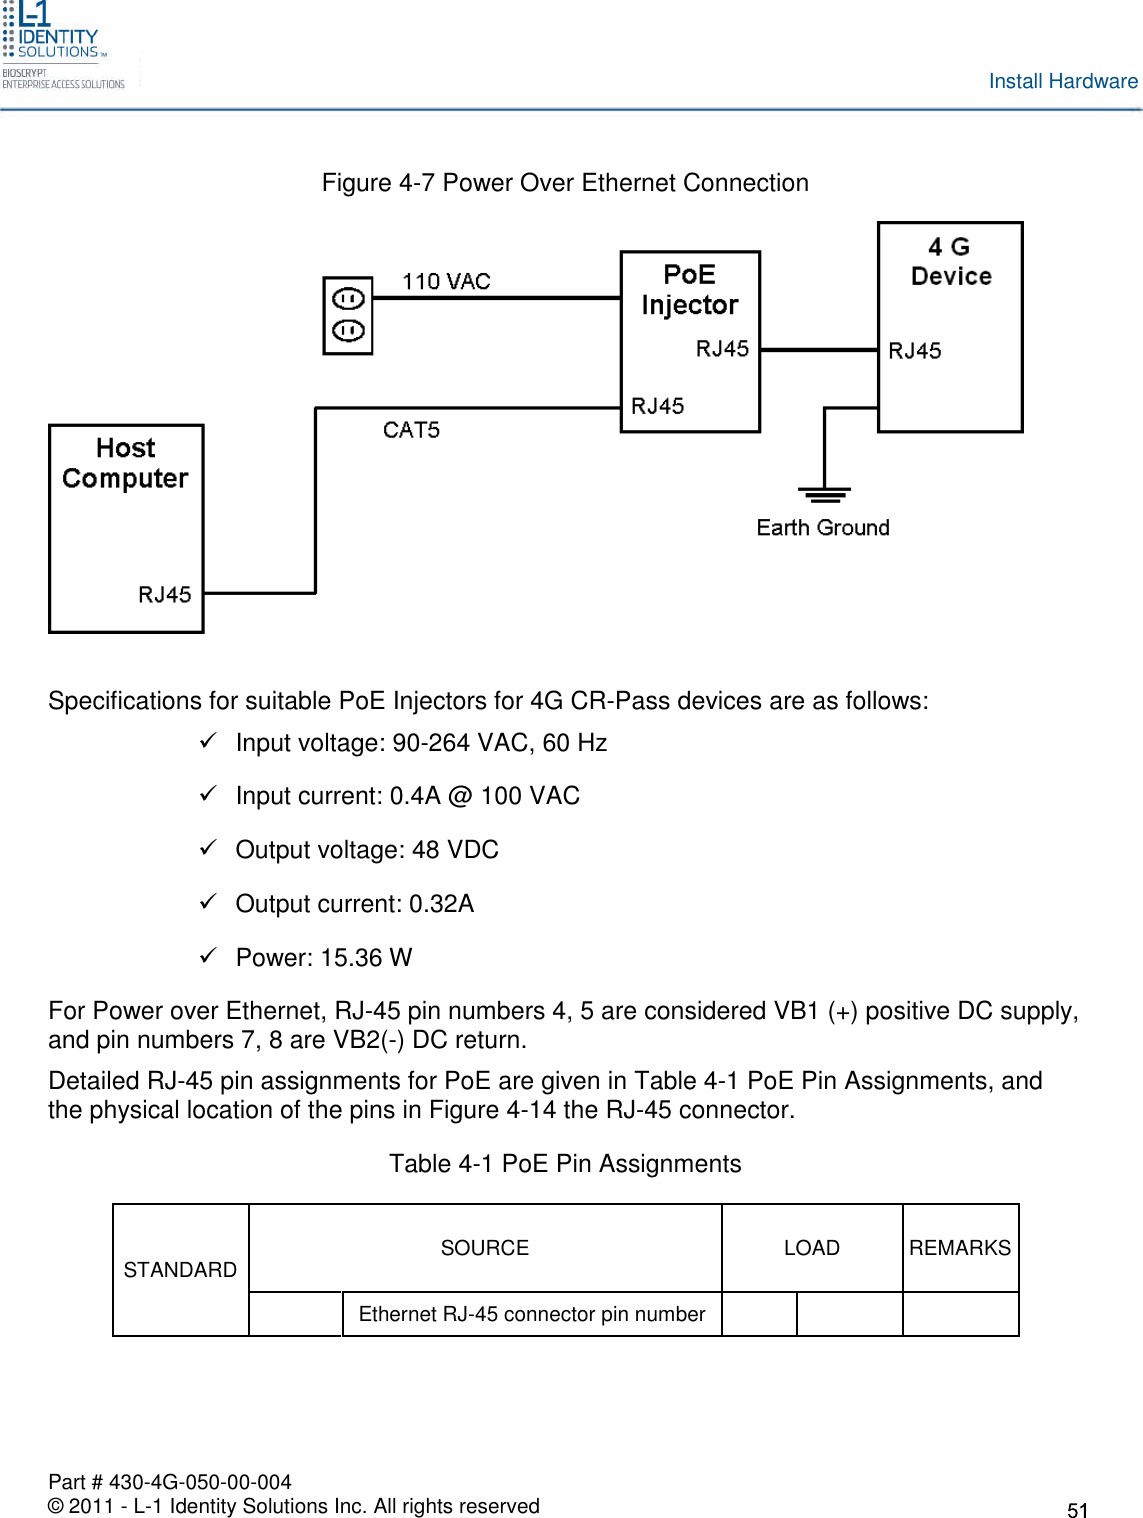 Part # 430-4G-050-00-004© 2011 - L-1 Identity Solutions Inc. All rights reservedInstall HardwareFigure 4-7 Power Over Ethernet ConnectionSpecifications for suitable PoE Injectors for 4G CR-Pass devices are as follows:Input voltage: 90-264 VAC, 60 HzInput current: 0.4A @ 100 VACOutput voltage: 48 VDCOutput current: 0.32APower: 15.36 WFor Power over Ethernet, RJ-45 pin numbers 4, 5 are considered VB1 (+) positive DC supply,and pin numbers 7, 8 are VB2(-) DC return.Detailed RJ-45 pin assignments for PoE are given in Table 4-1 PoE Pin Assignments, andthe physical location of the pins in Figure 4-14 the RJ-45 connector.Table 4-1 PoE Pin AssignmentsSTANDARD SOURCE LOAD REMARKSEthernet RJ-45 connector pin number